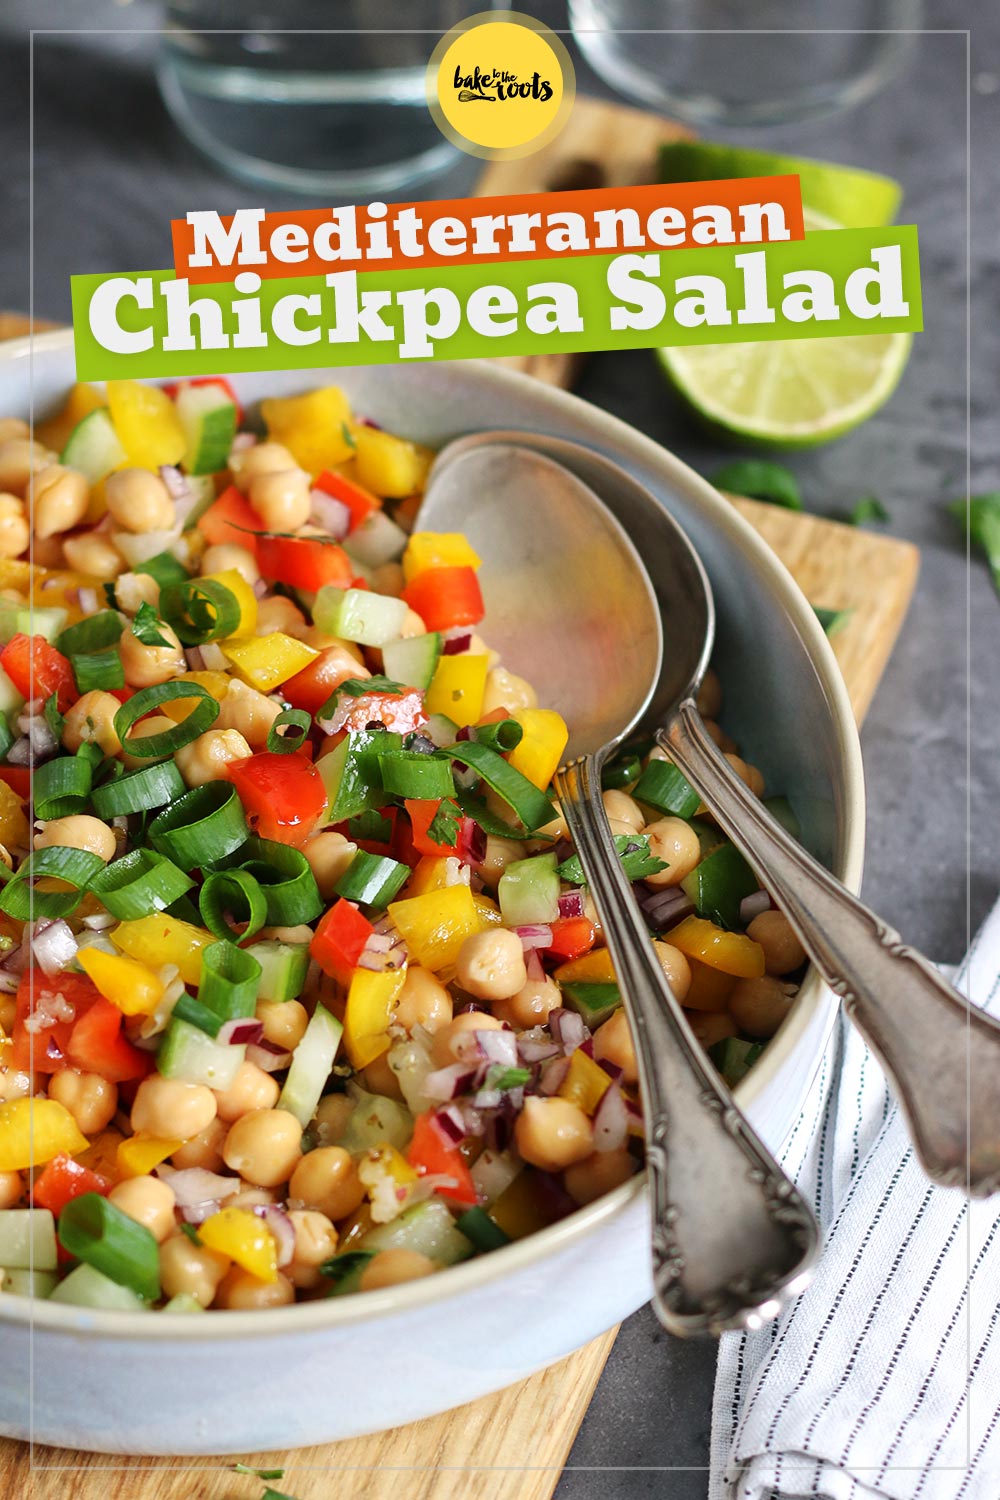 Mediterranean Chickpea Salad | Bake to the roots